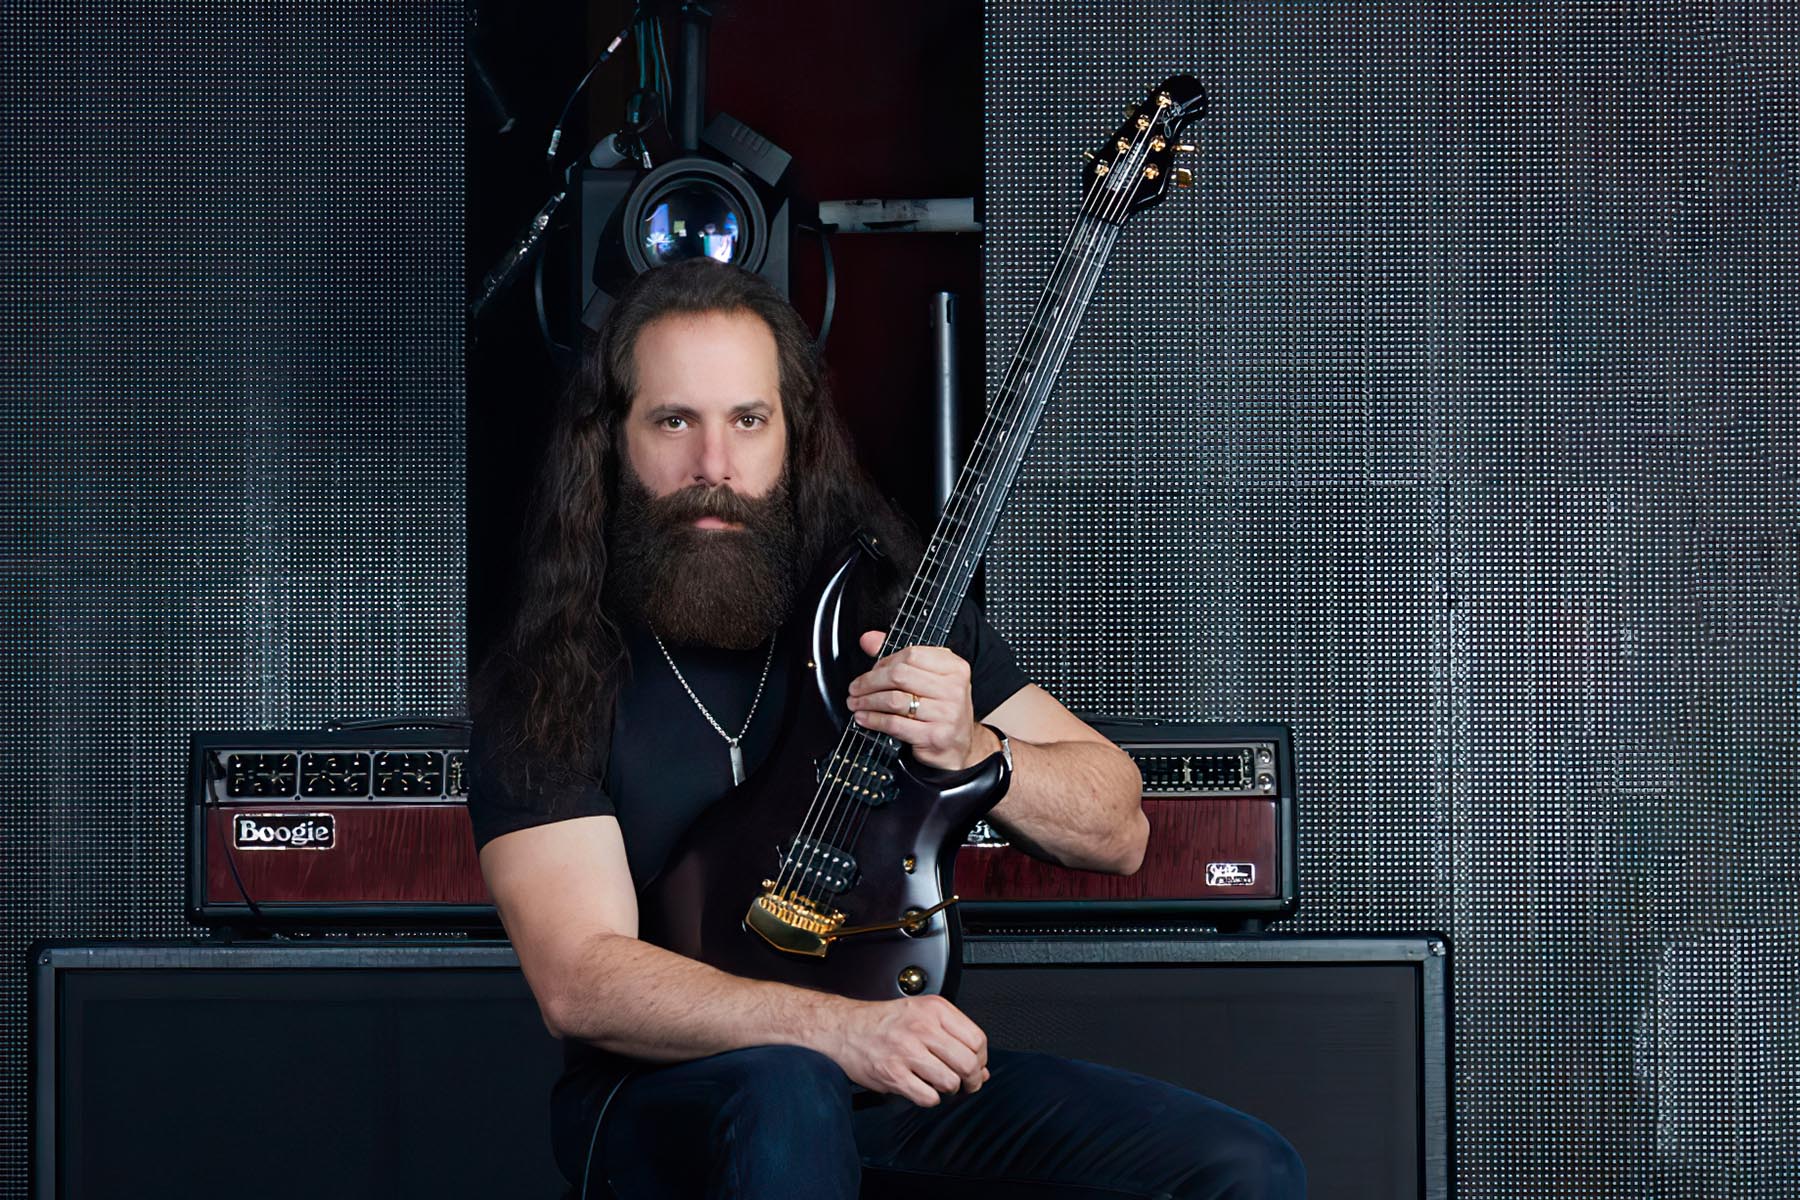 Dream Theater S Guitarist John Petrucci Talks Working With Mike Portnoy On His Recent Solo Album We Knew It Was Going To Happen It Was Really A Great Thing And There Was A